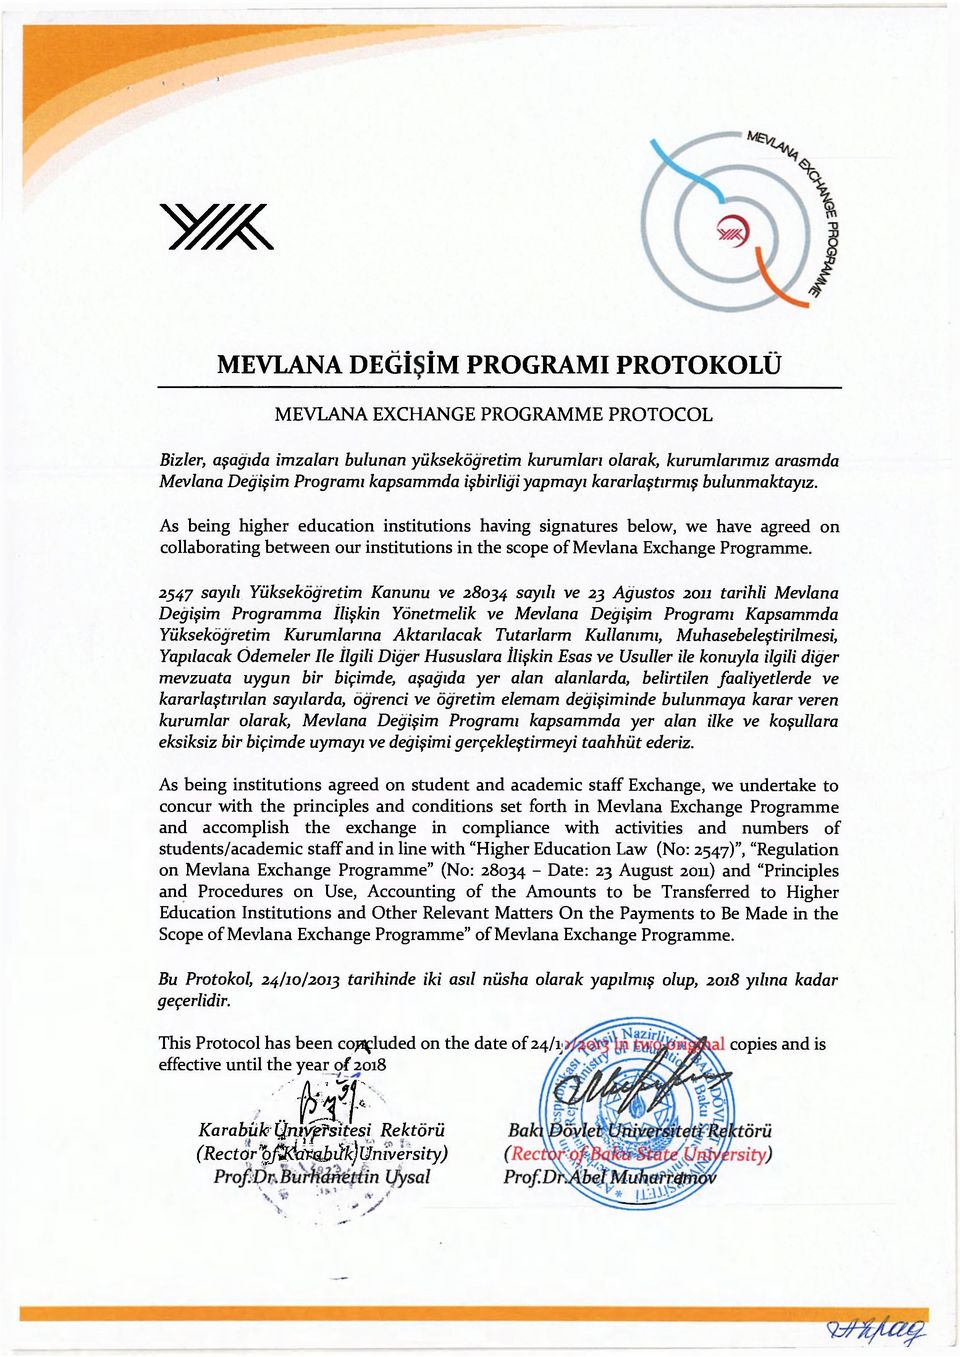 As being higher education institutions having signatures below, we have agreed on collaborating between our institutions in the scope of Mevlana Exchange Programme.